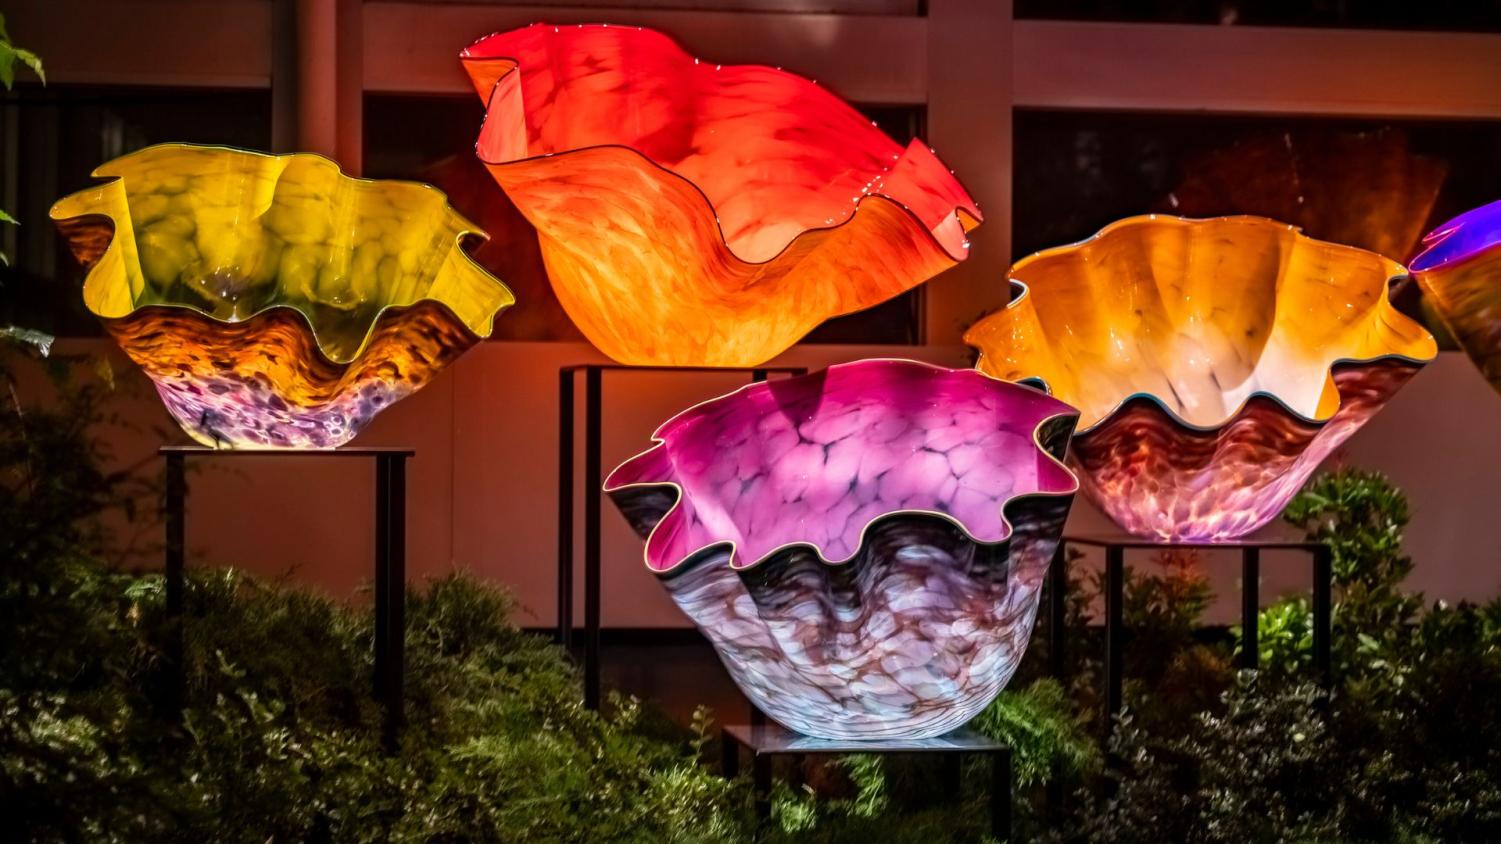 Two ways to see Dale Chihuly artwork and how living on a kibbutz